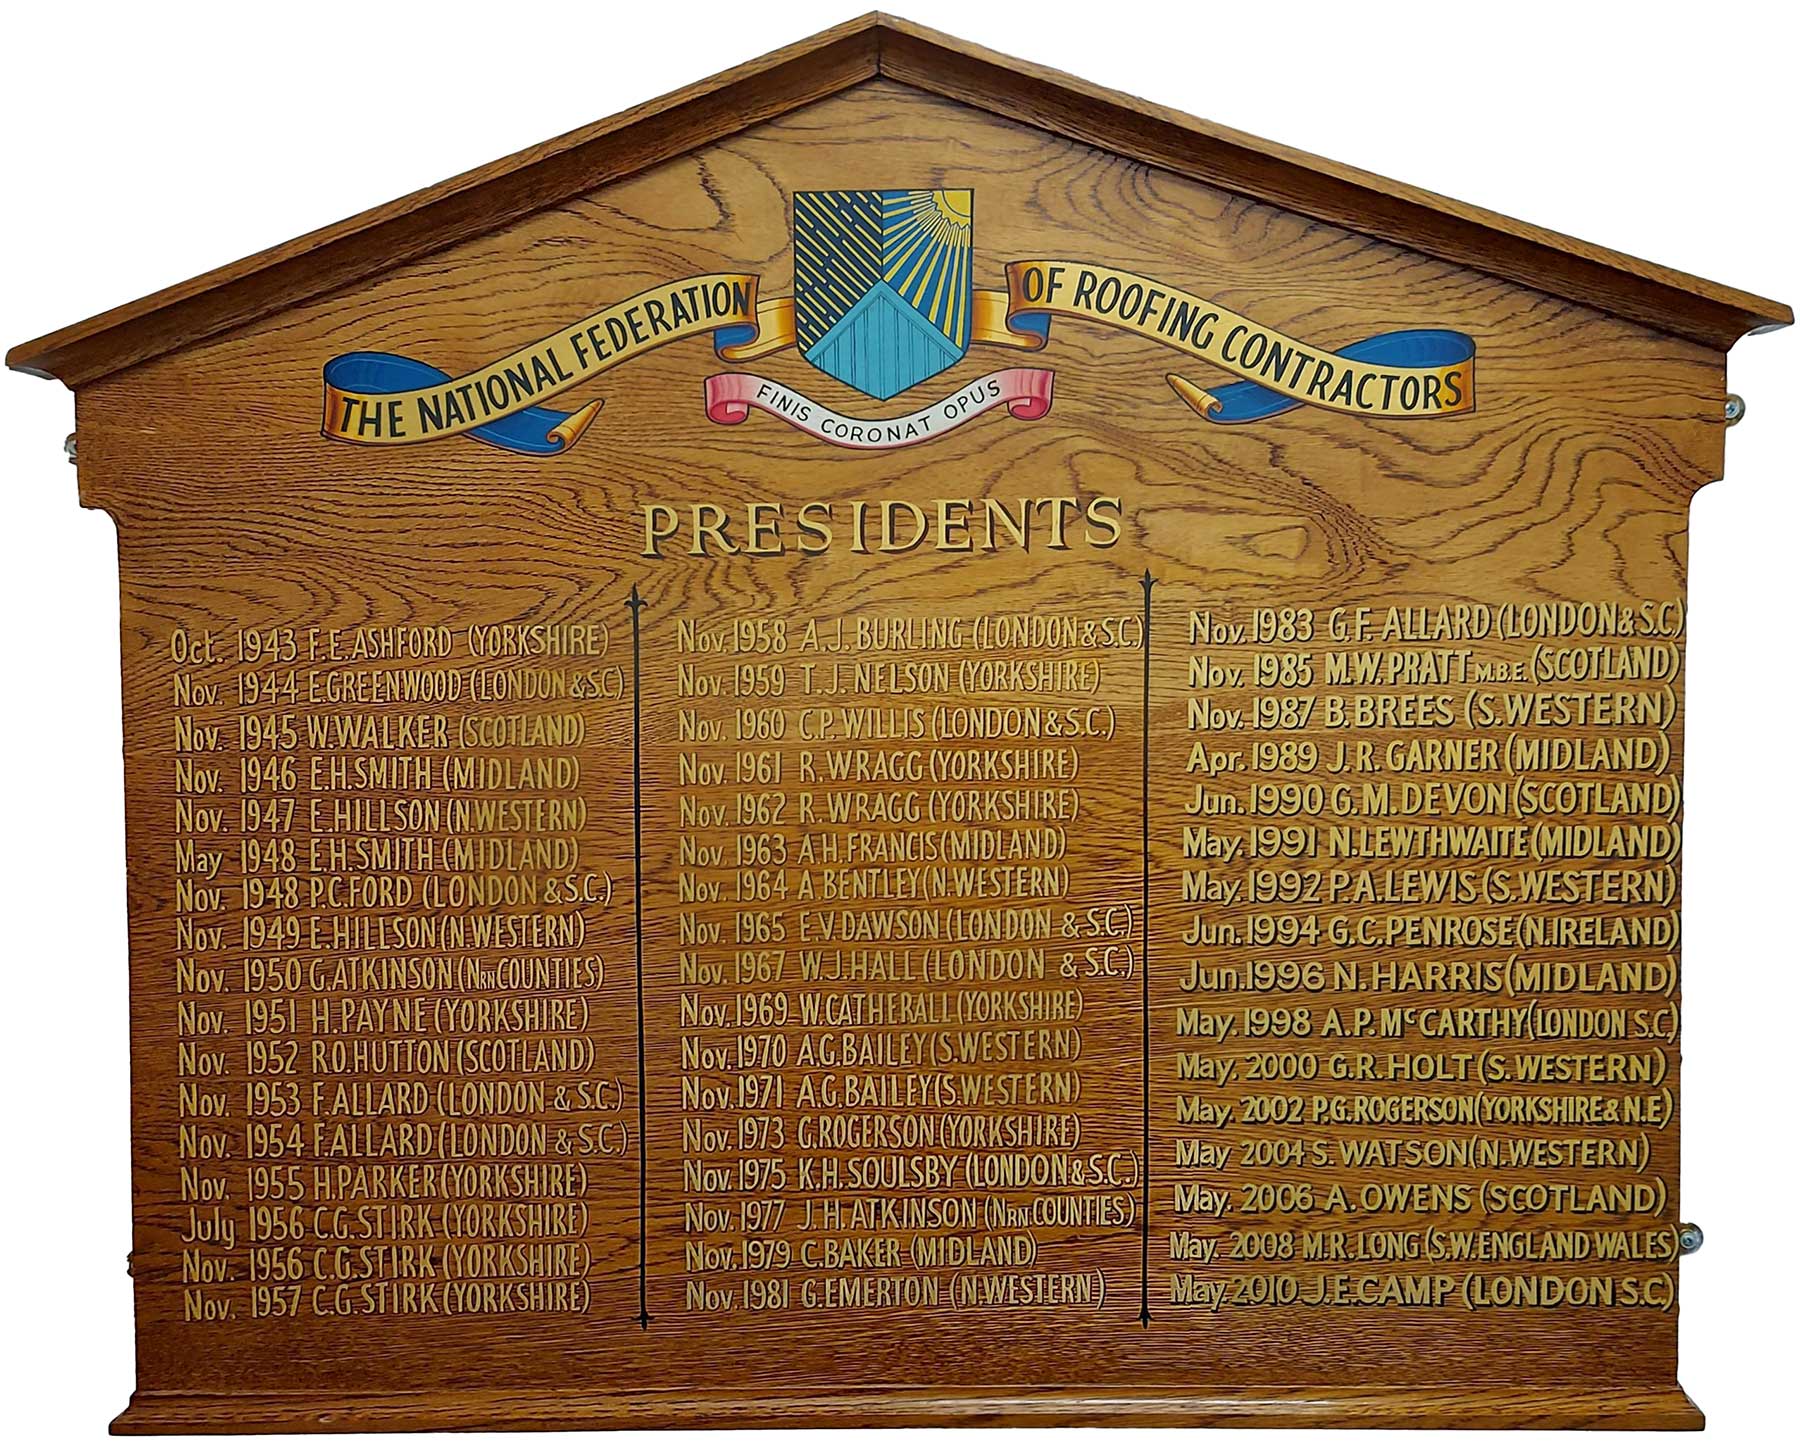 NFRC past presidents 1943 to 2010